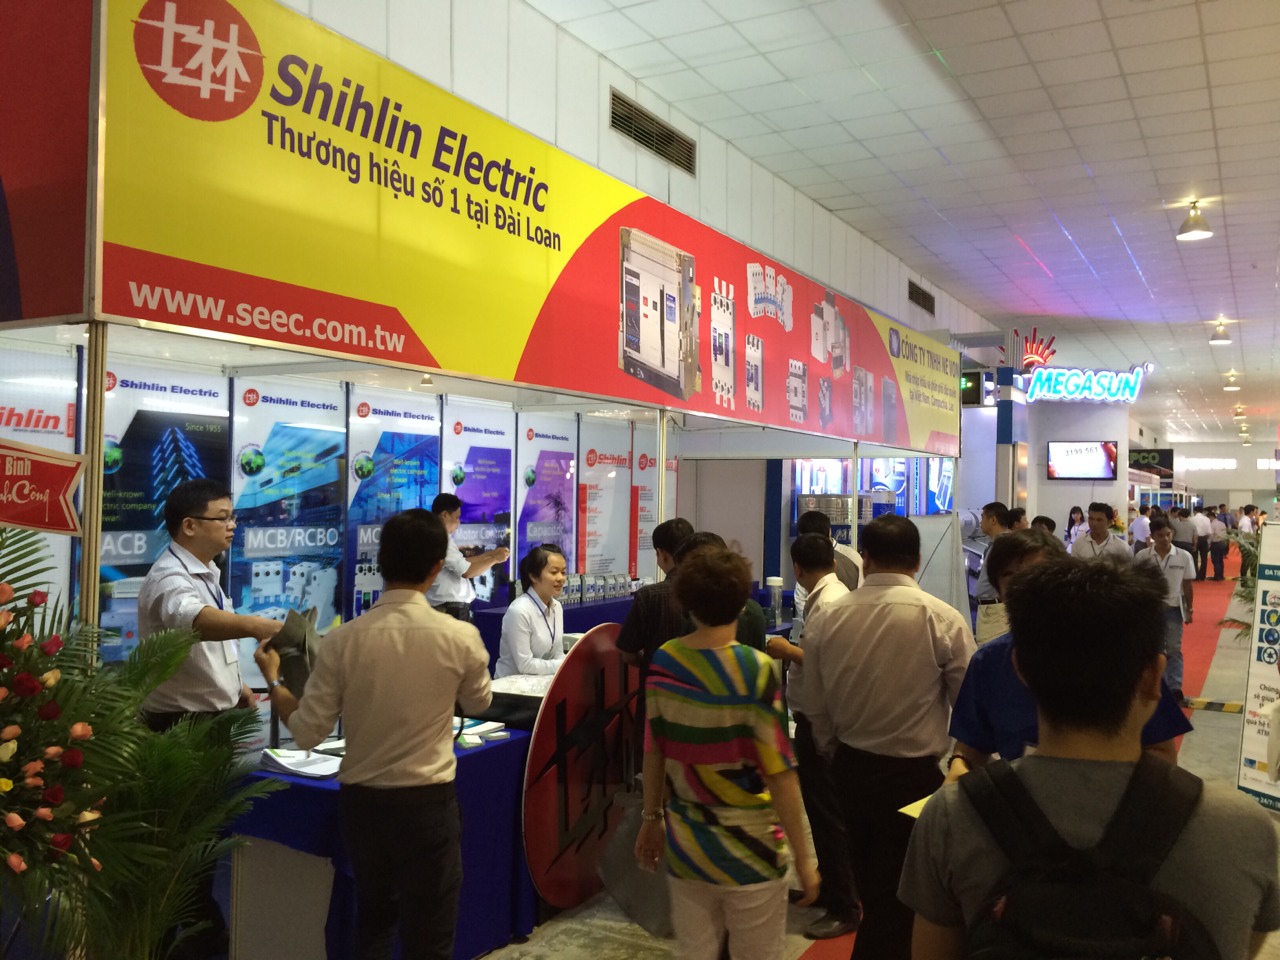 Shihlin Electric stand at The 7th International Exhibition on Electrical Technology & Equipment- Vietnam ETE 2014